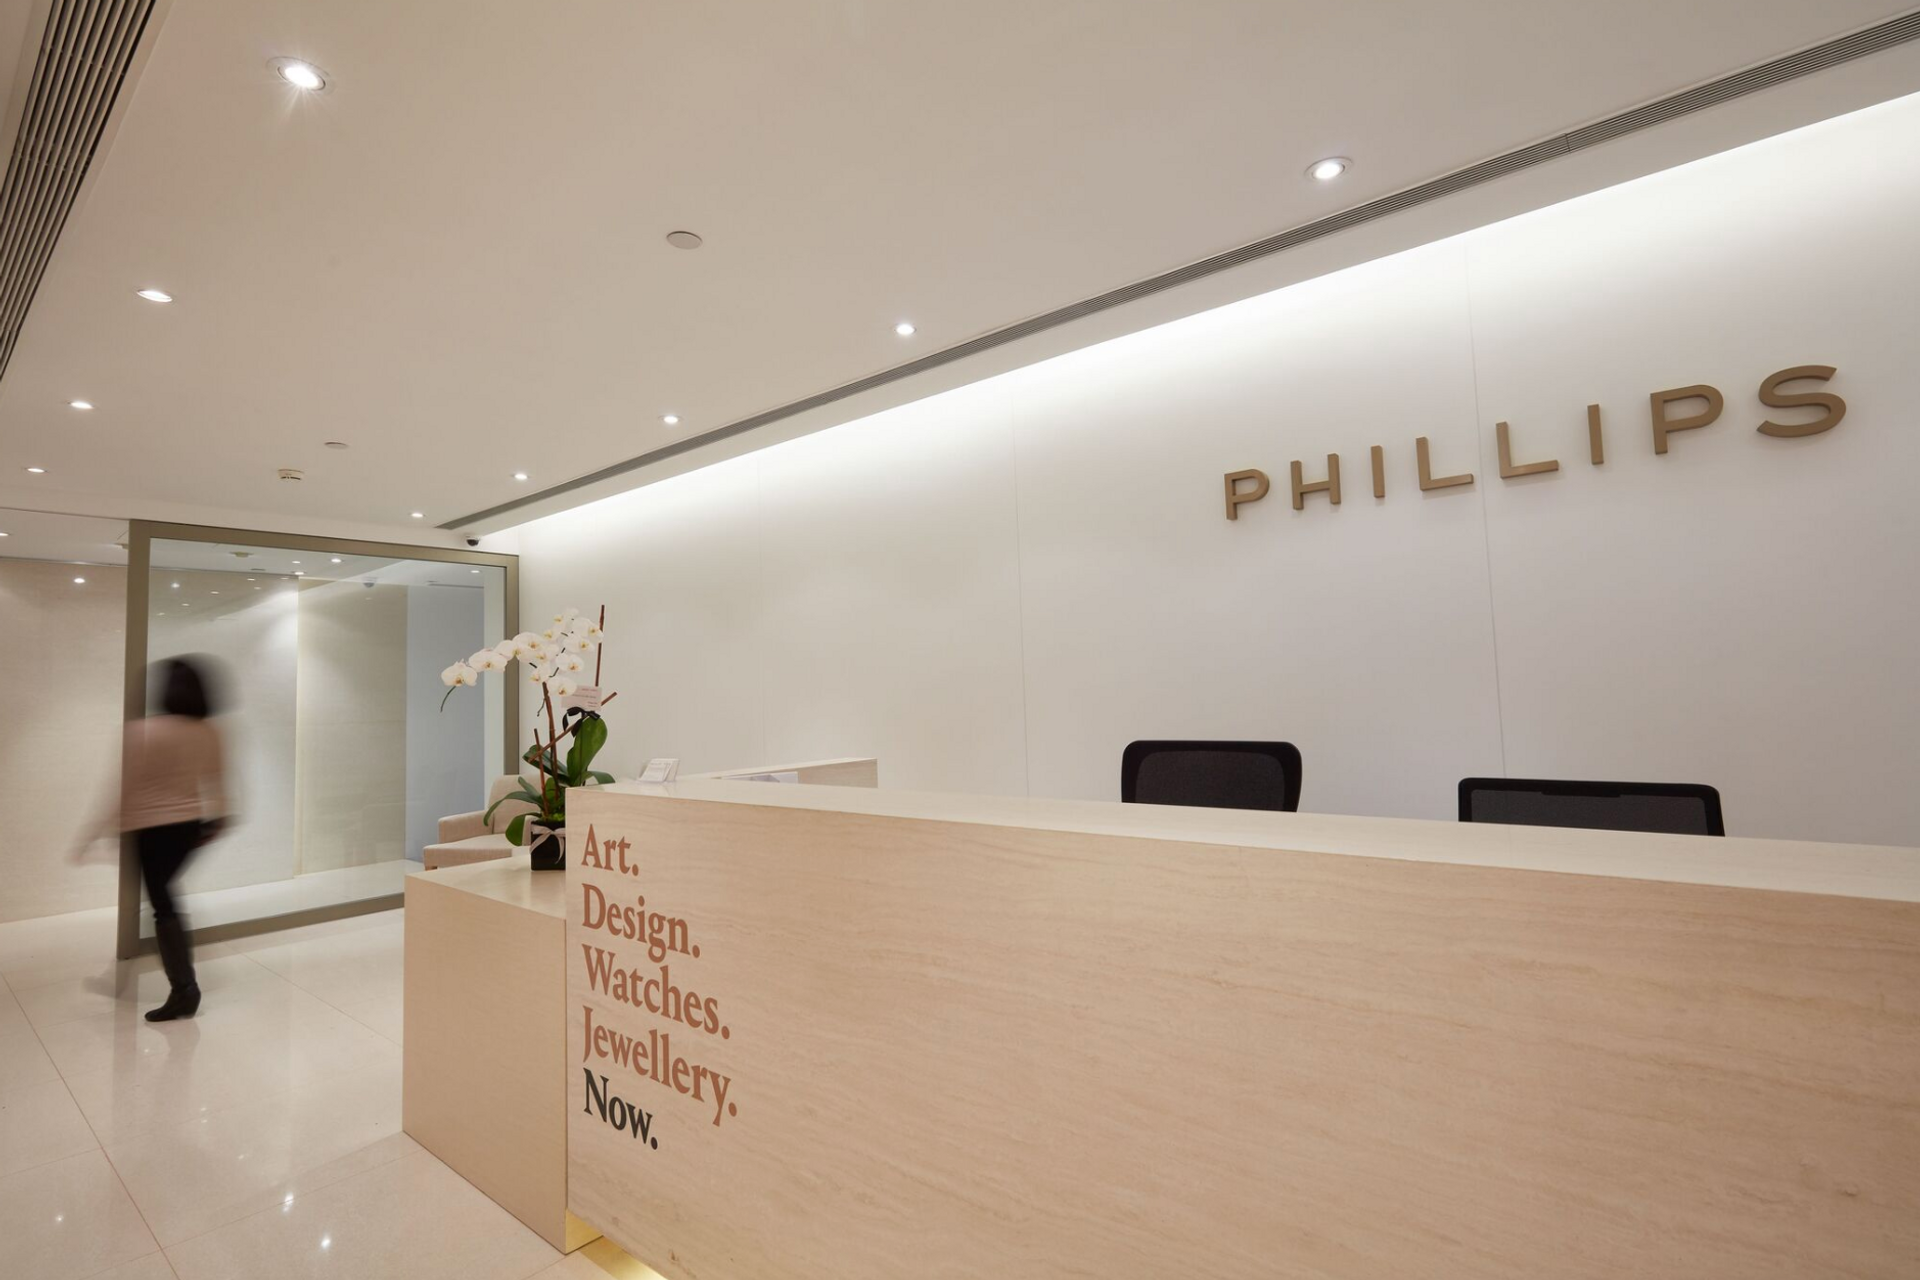 Phillips’s Asian headquarters in Hong Kong. Photo courtesy of Phillips